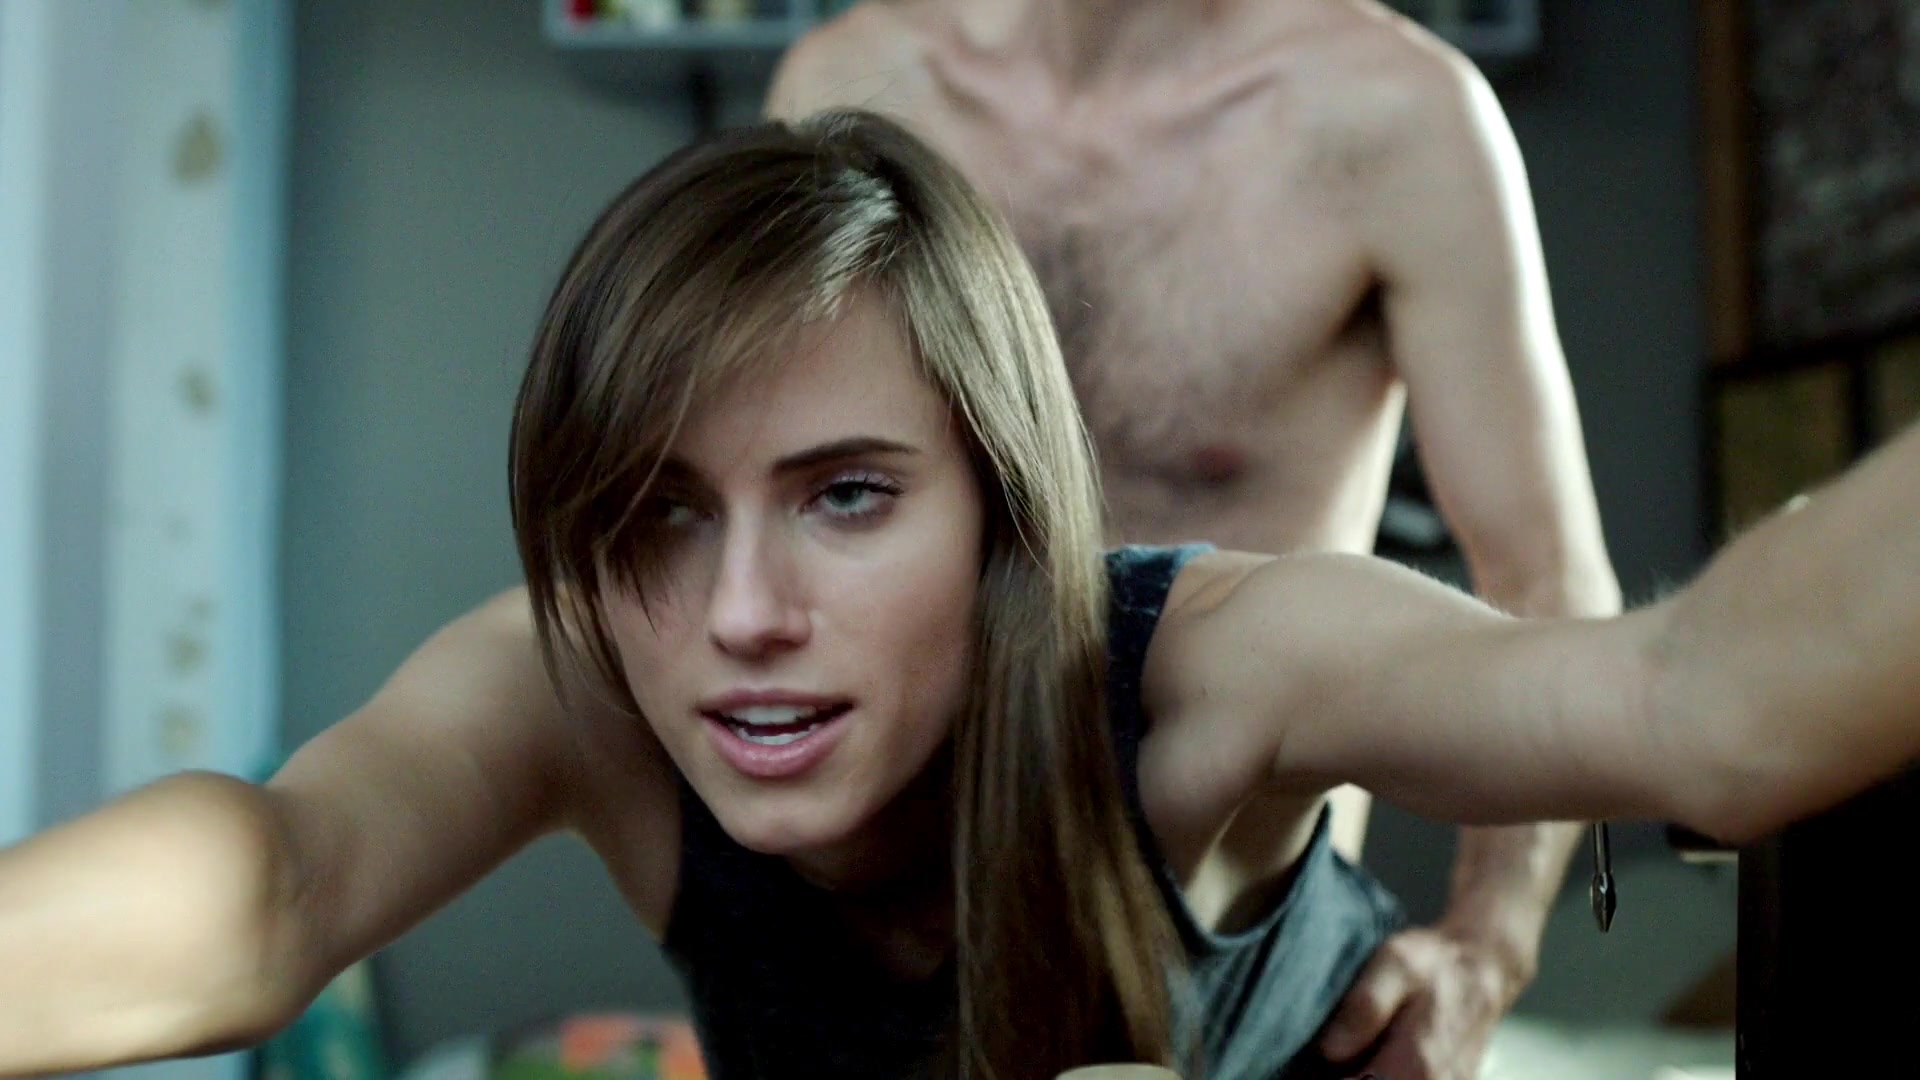 Allison Williams Doggy Style Sex In The Kitchen From Girls Series.